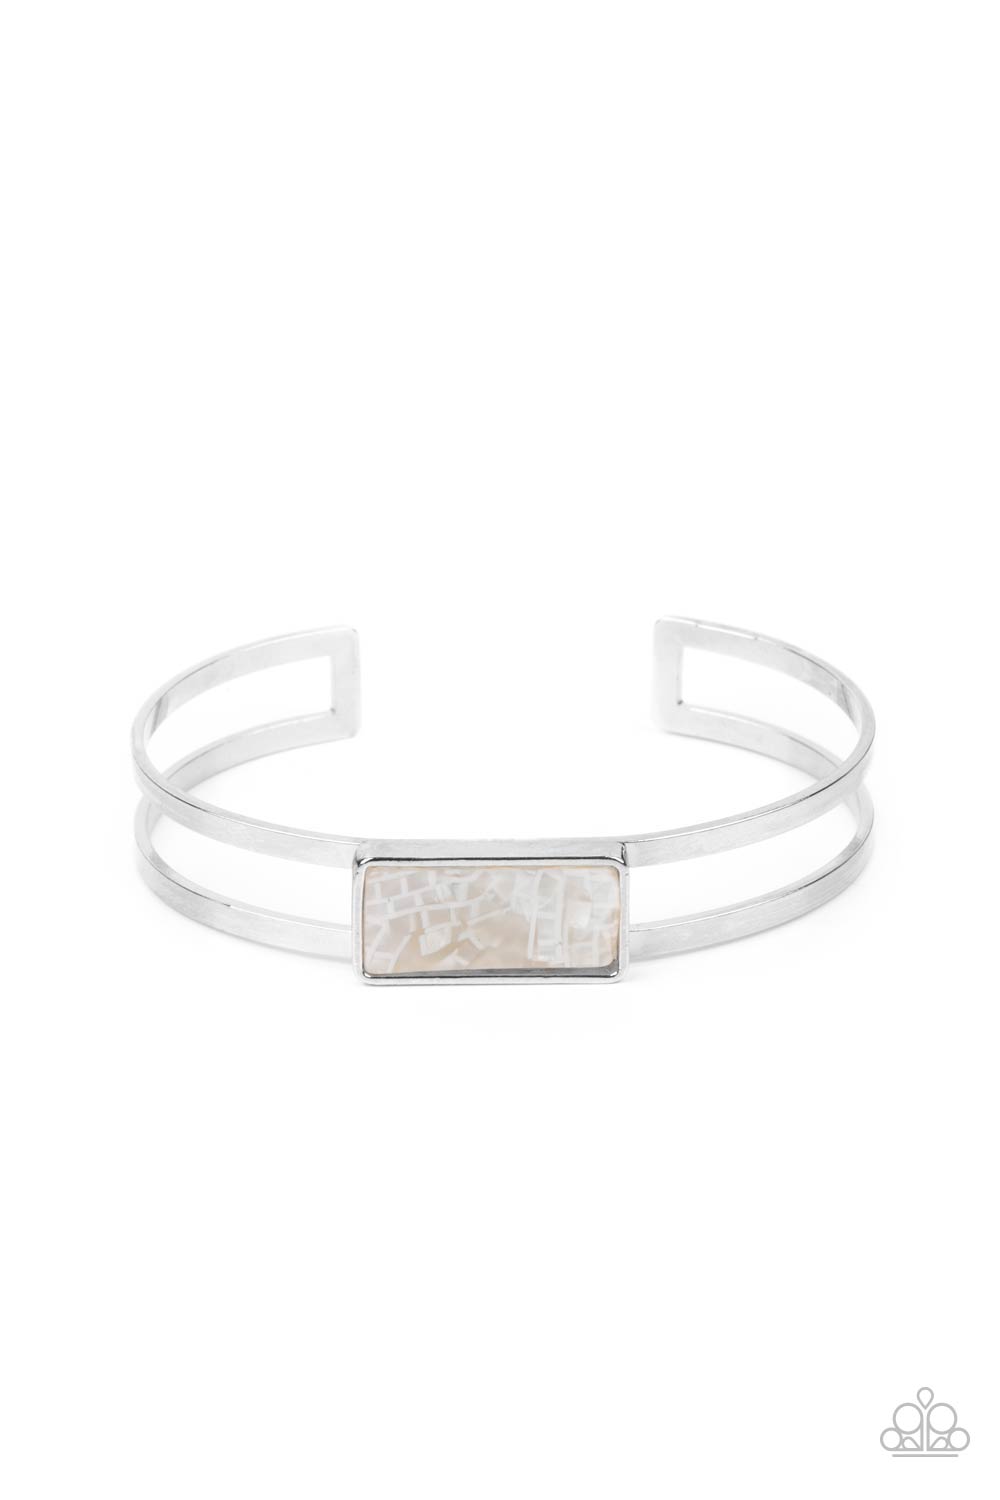 Remarkably Cute and Resolute - White cuff bracelet 778